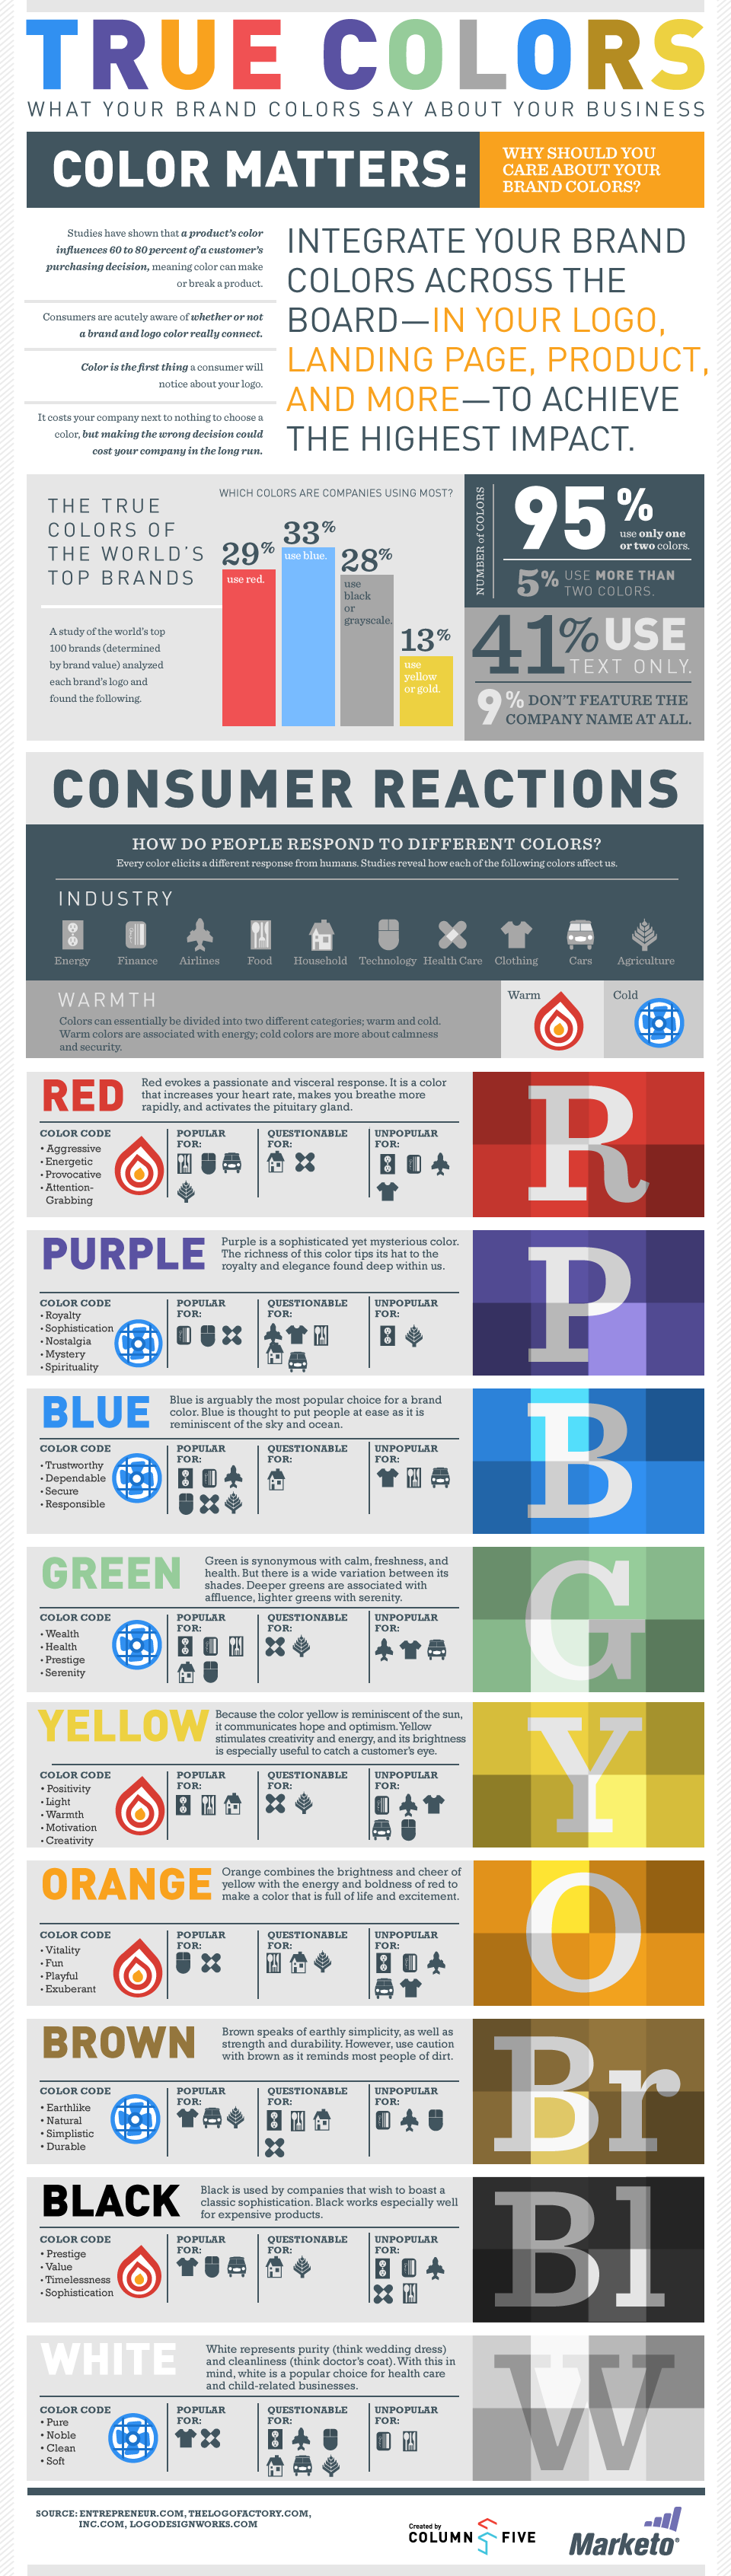 Brand & Logo Colors - Infographic